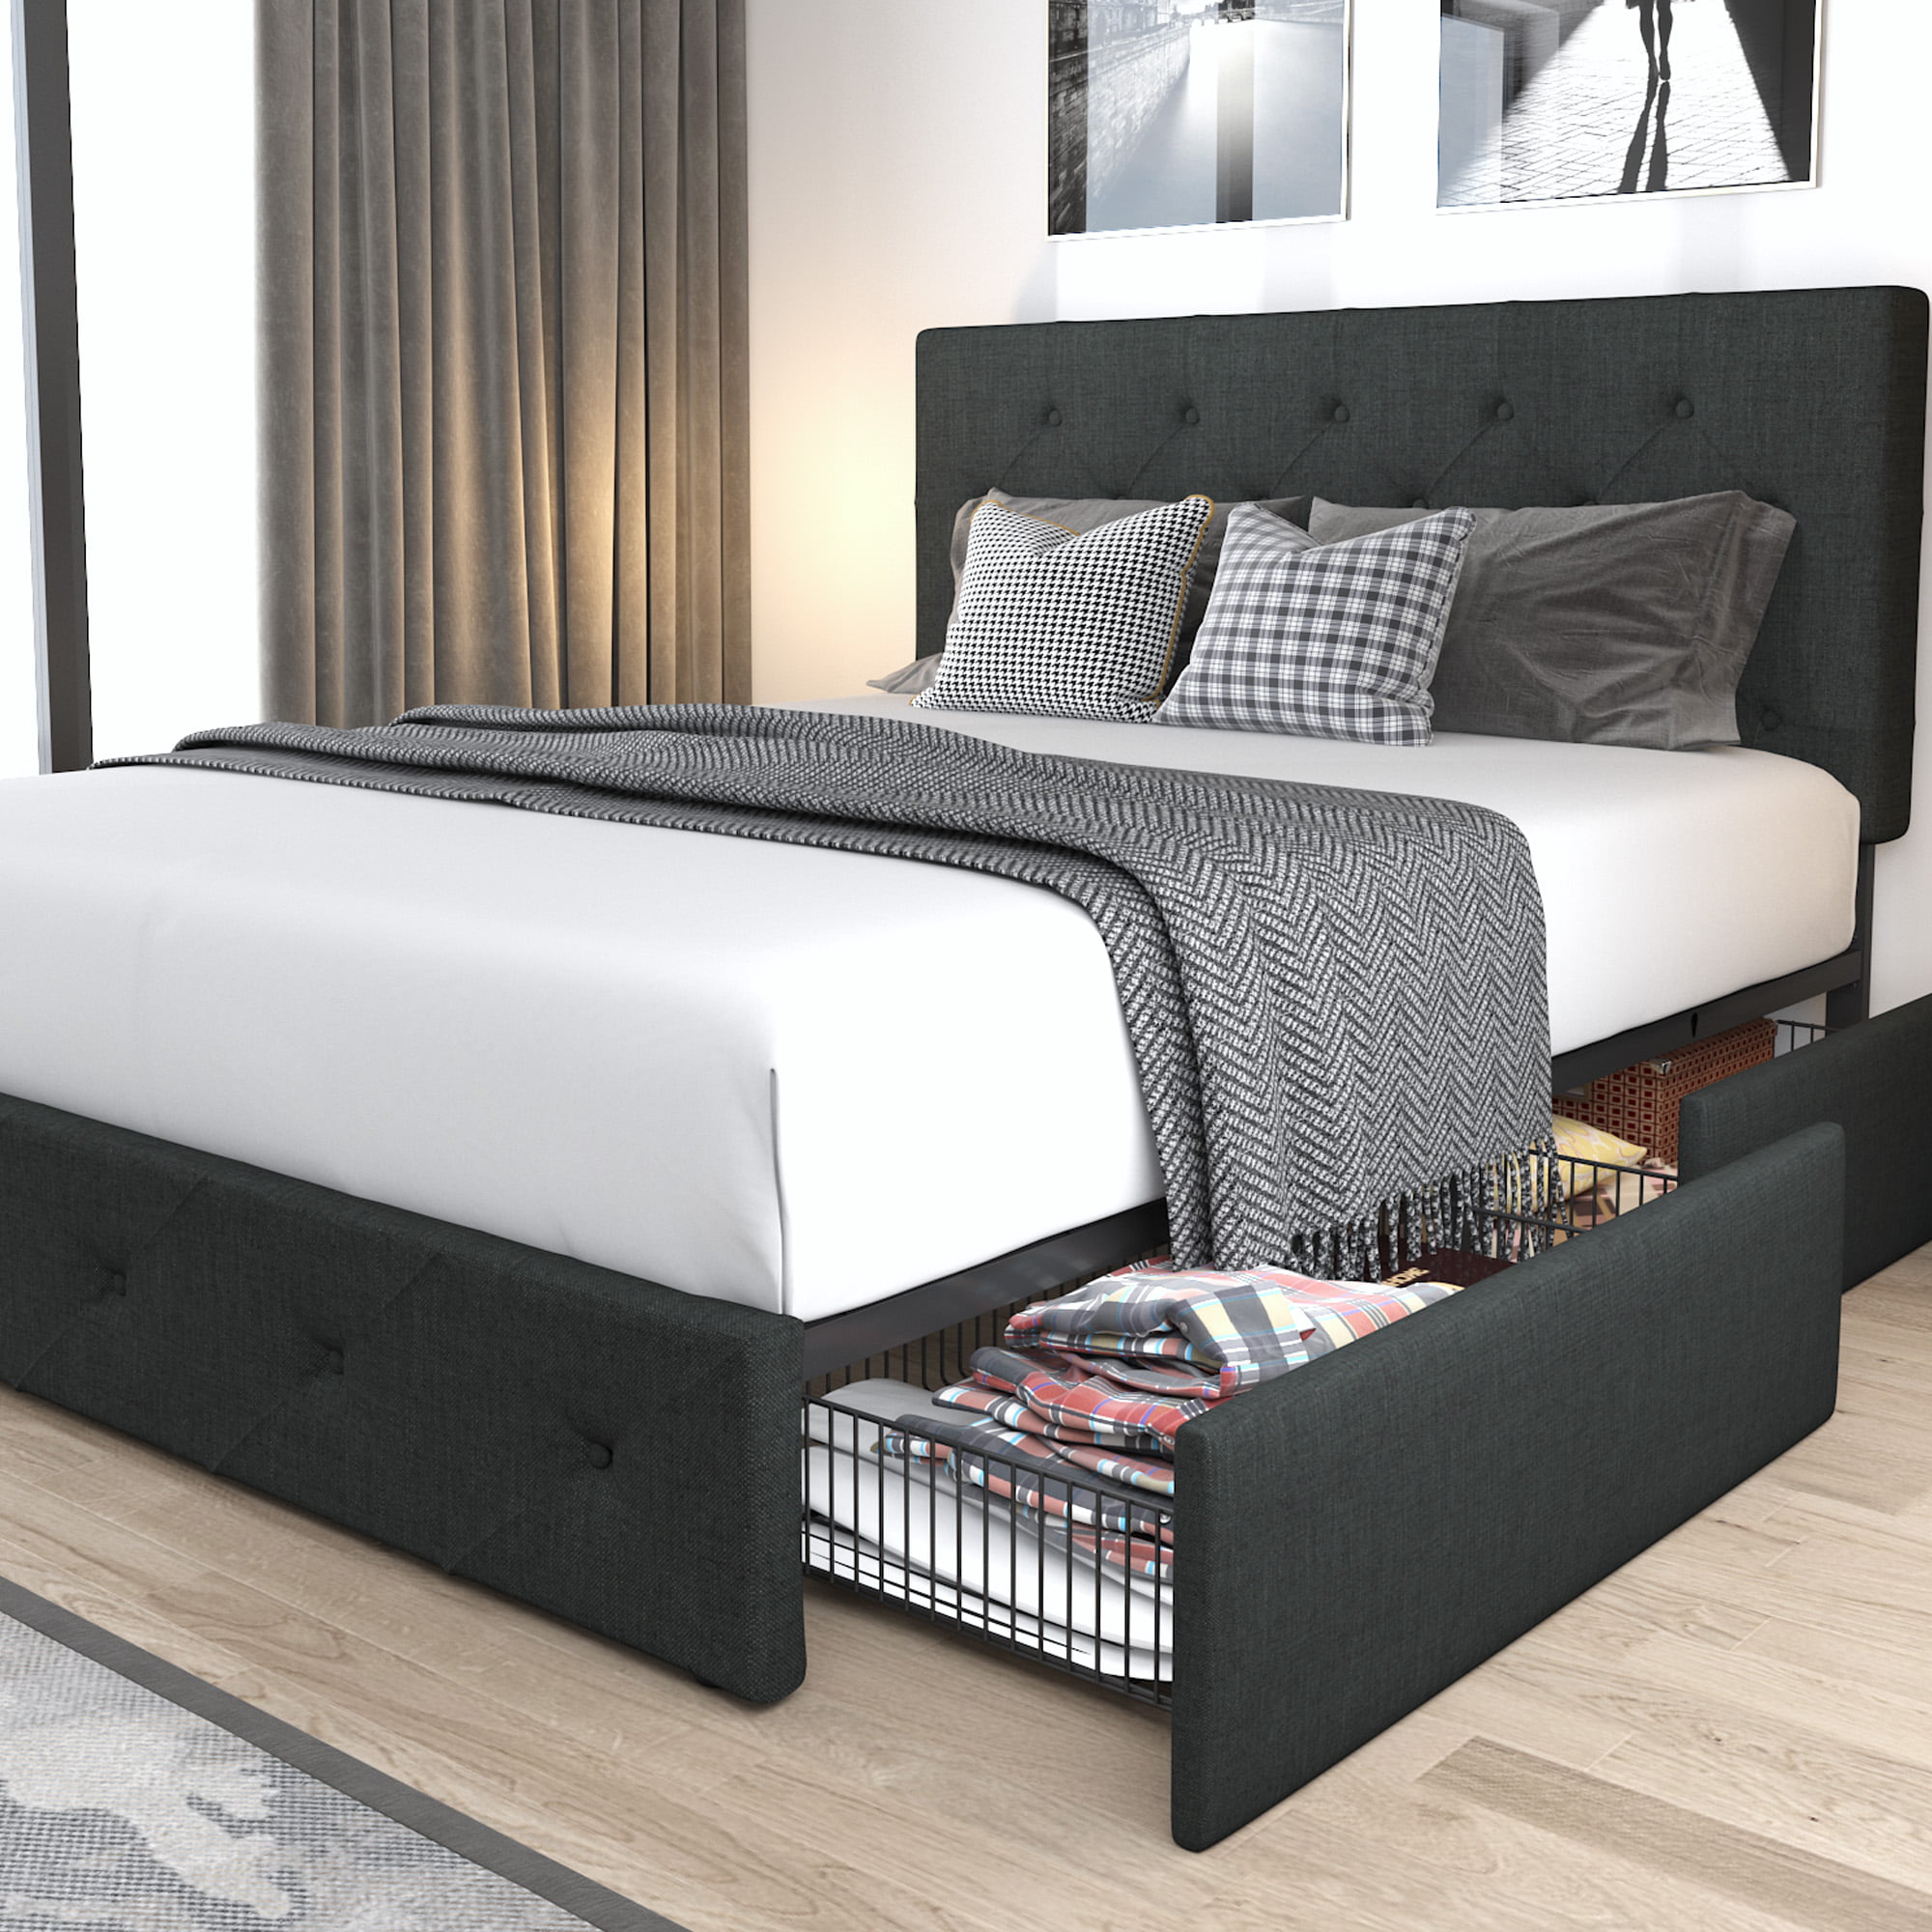 Amolife Queen Size Platform Bed Frame with Headboard and 4 Drawers